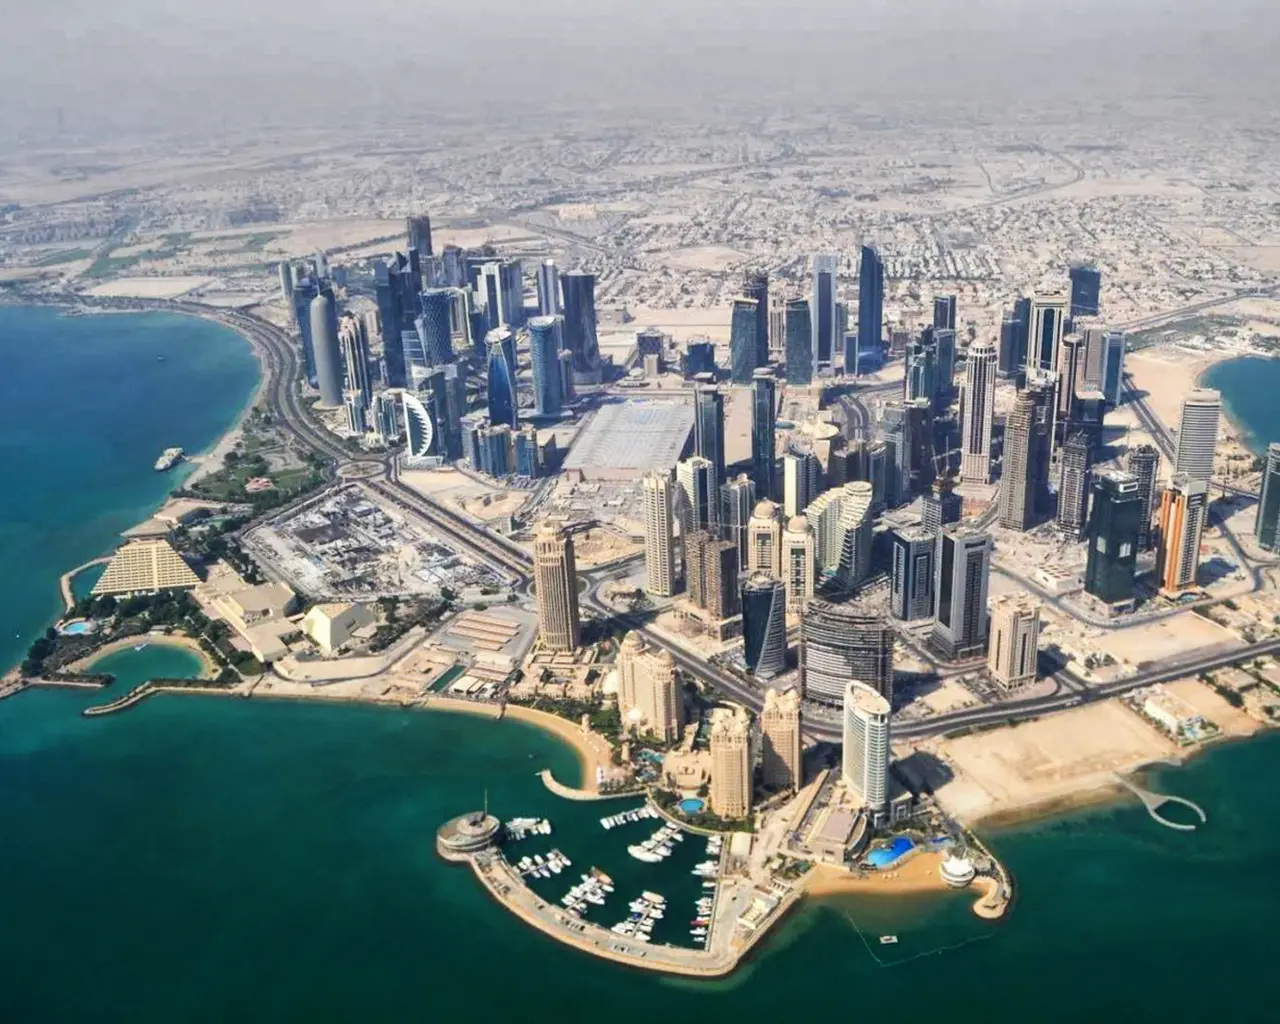 An aerial view of Doha's West Bay area. Dozens of high-rise buildings are clustered on a short peninsula. Where the lands meets the water, there are beach areas and marinas.